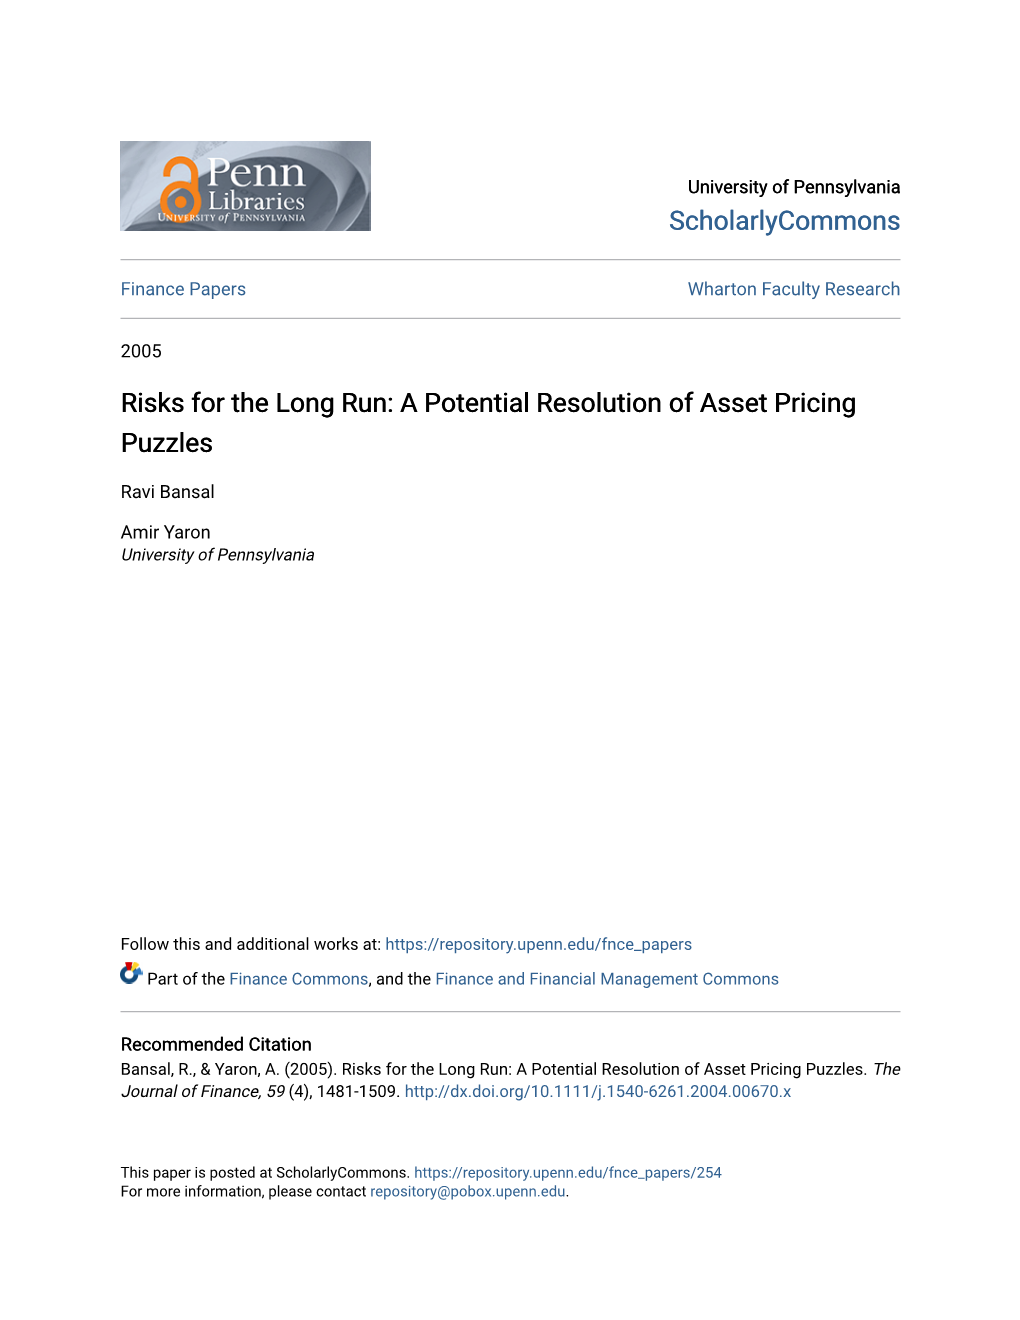 Risks for the Long Run: a Potential Resolution of Asset Pricing Puzzles